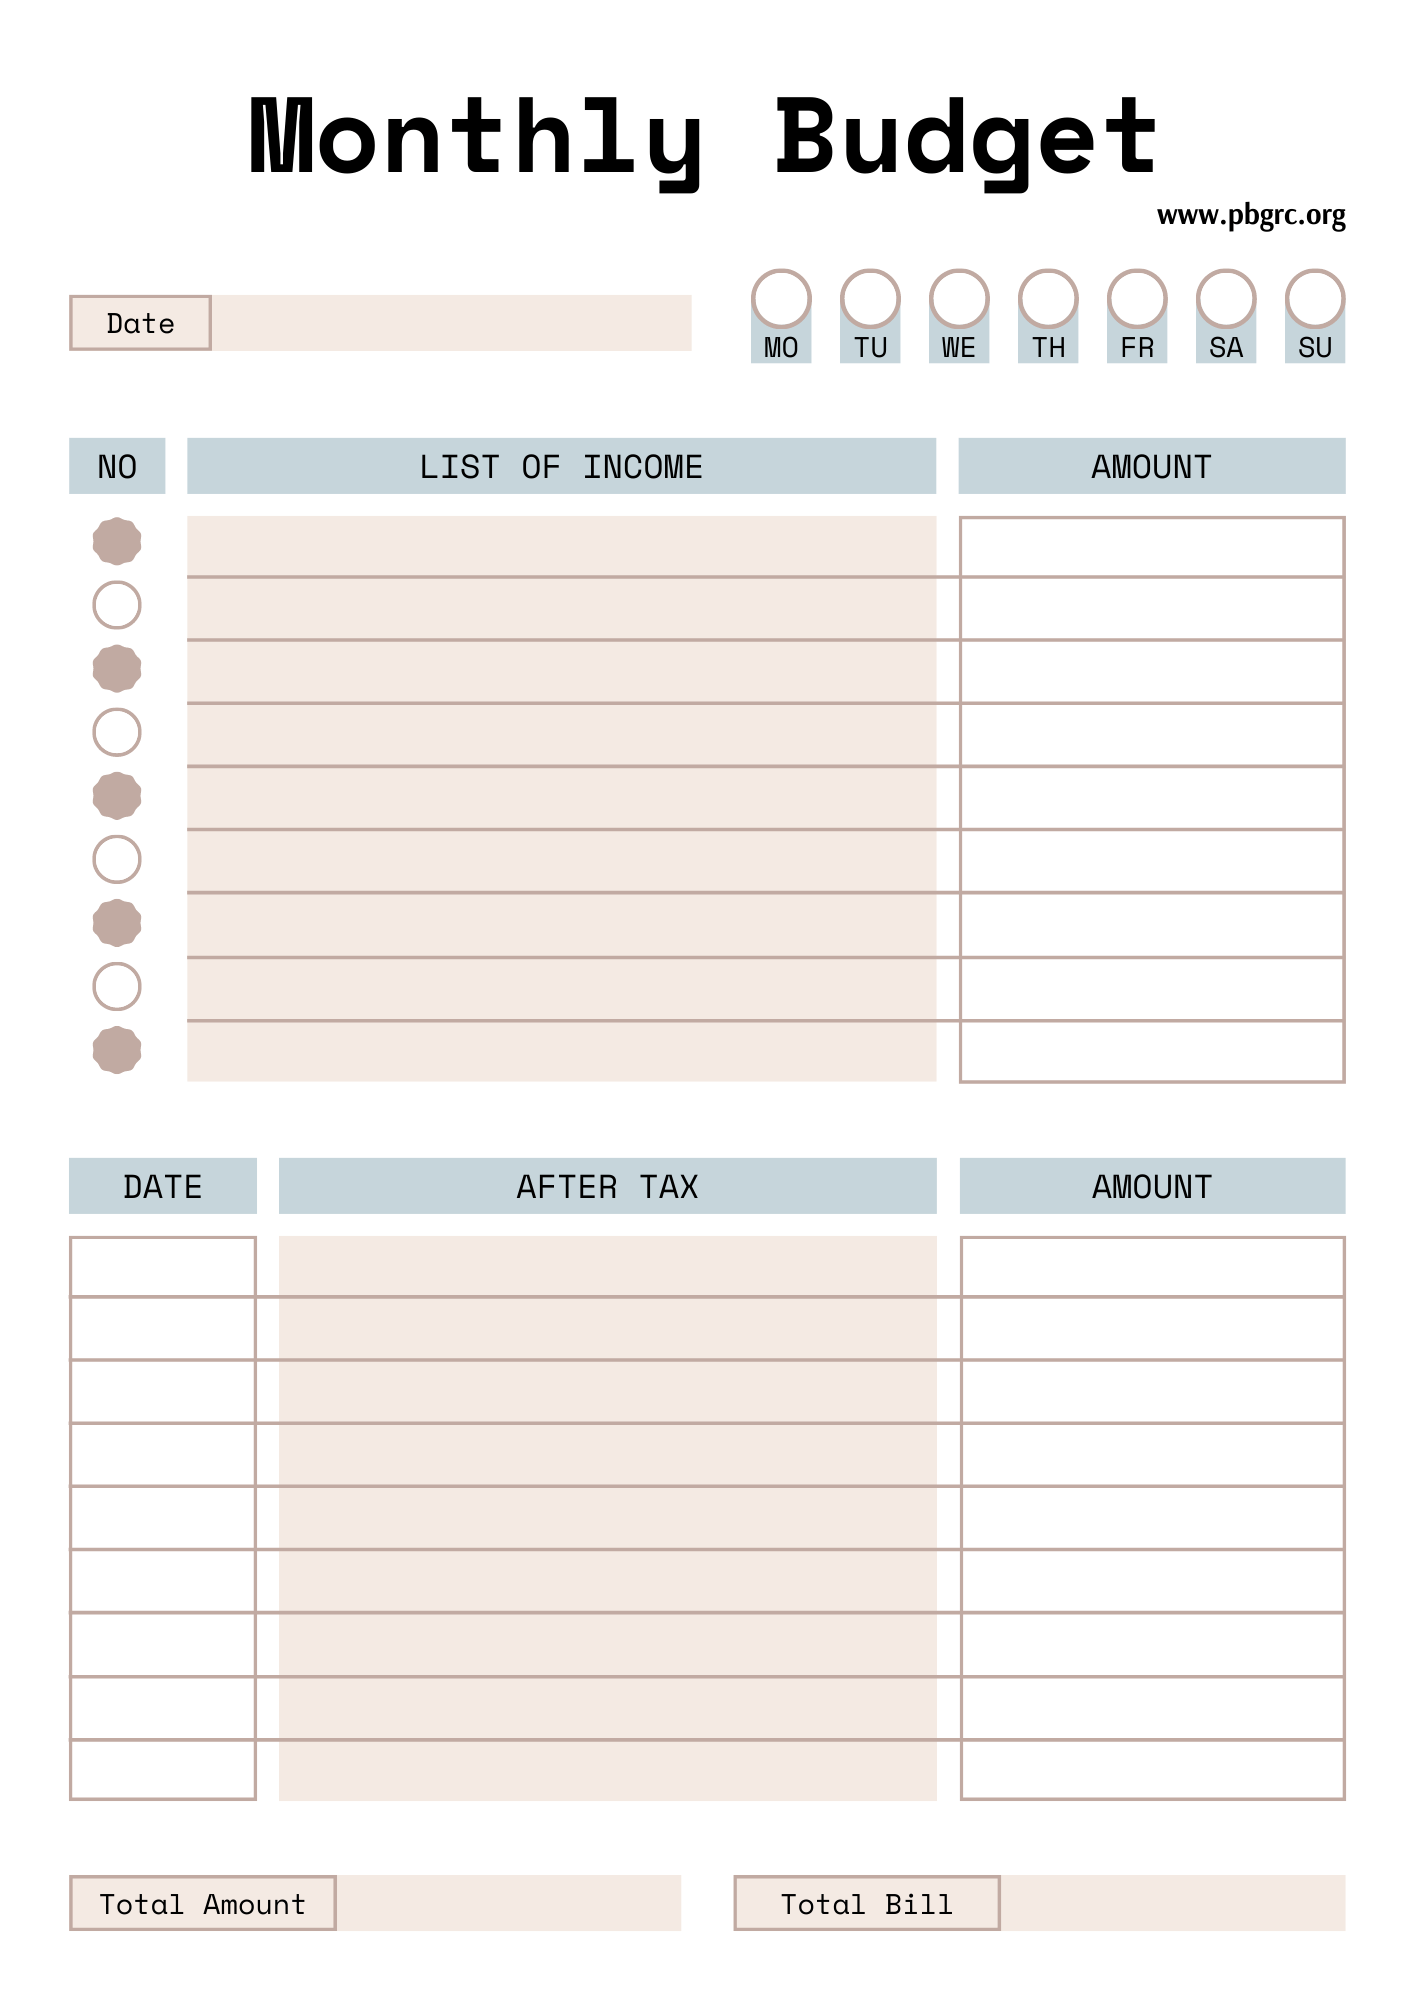 Monthly Budget Excel Template